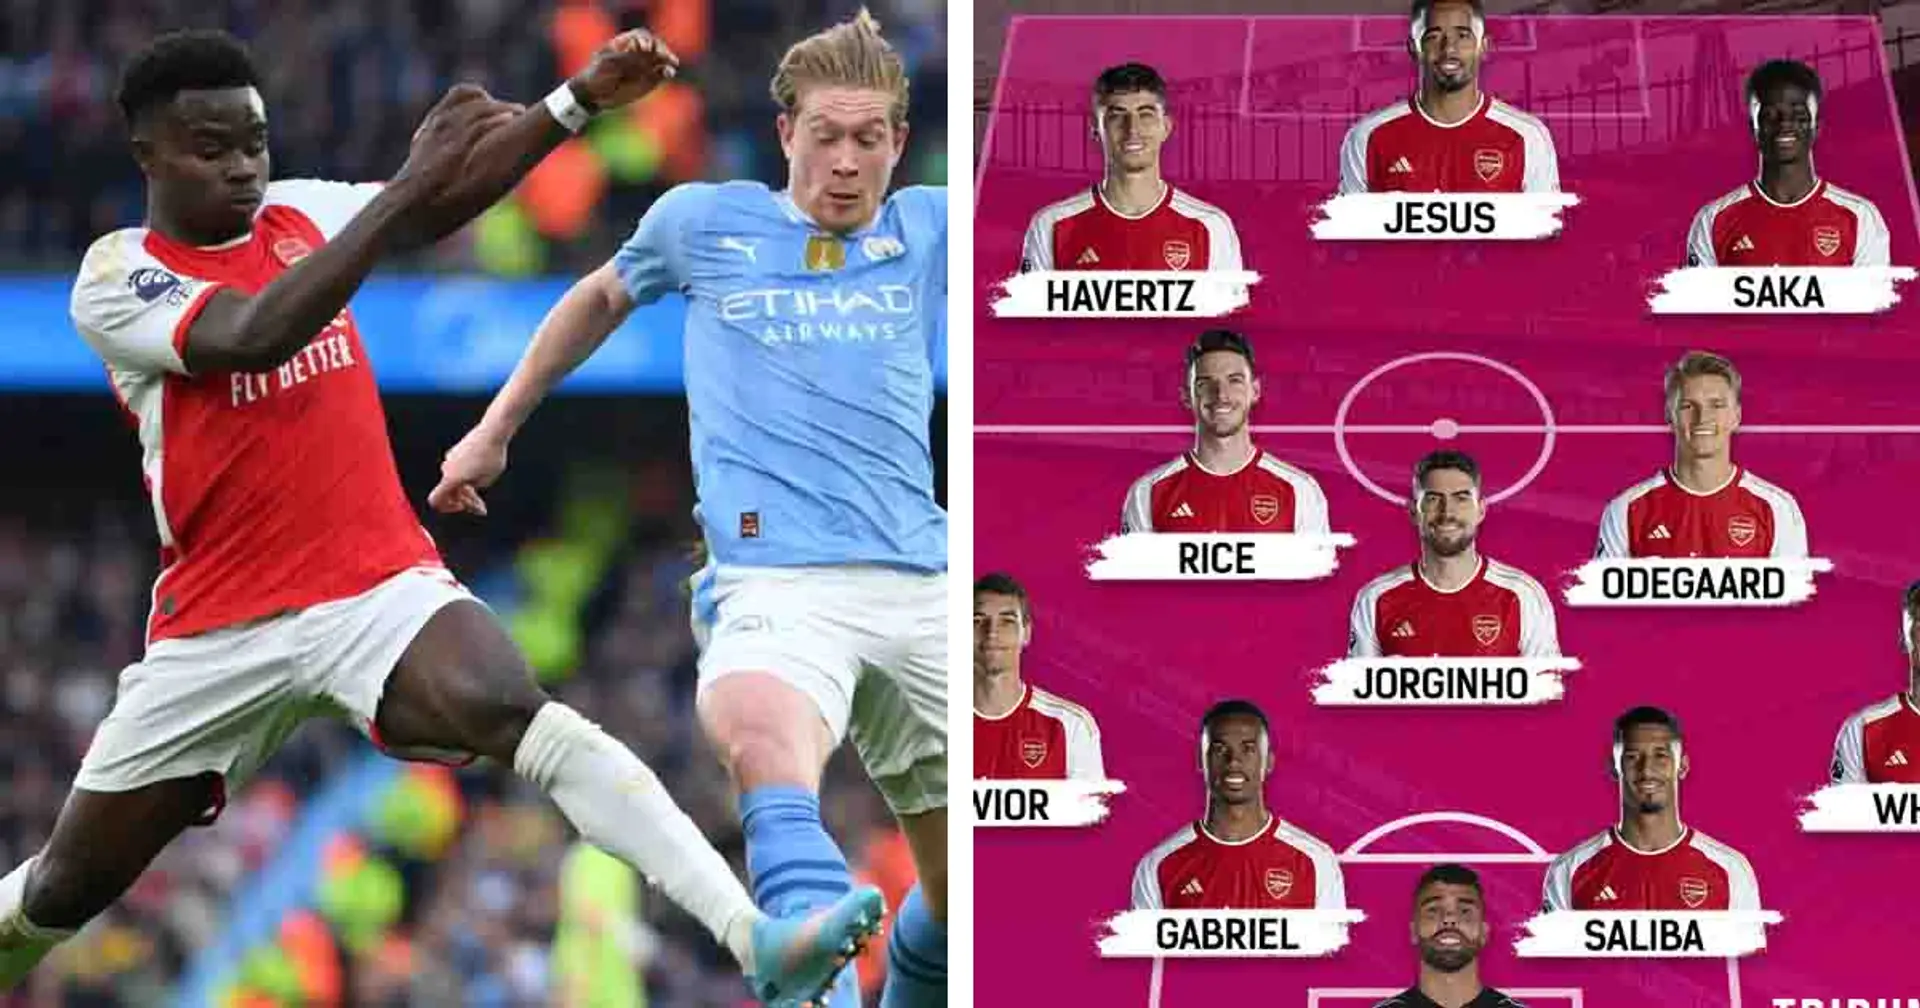 Arsenal's biggest weaknesses in Man City draw shown in lineup - 3 players feature